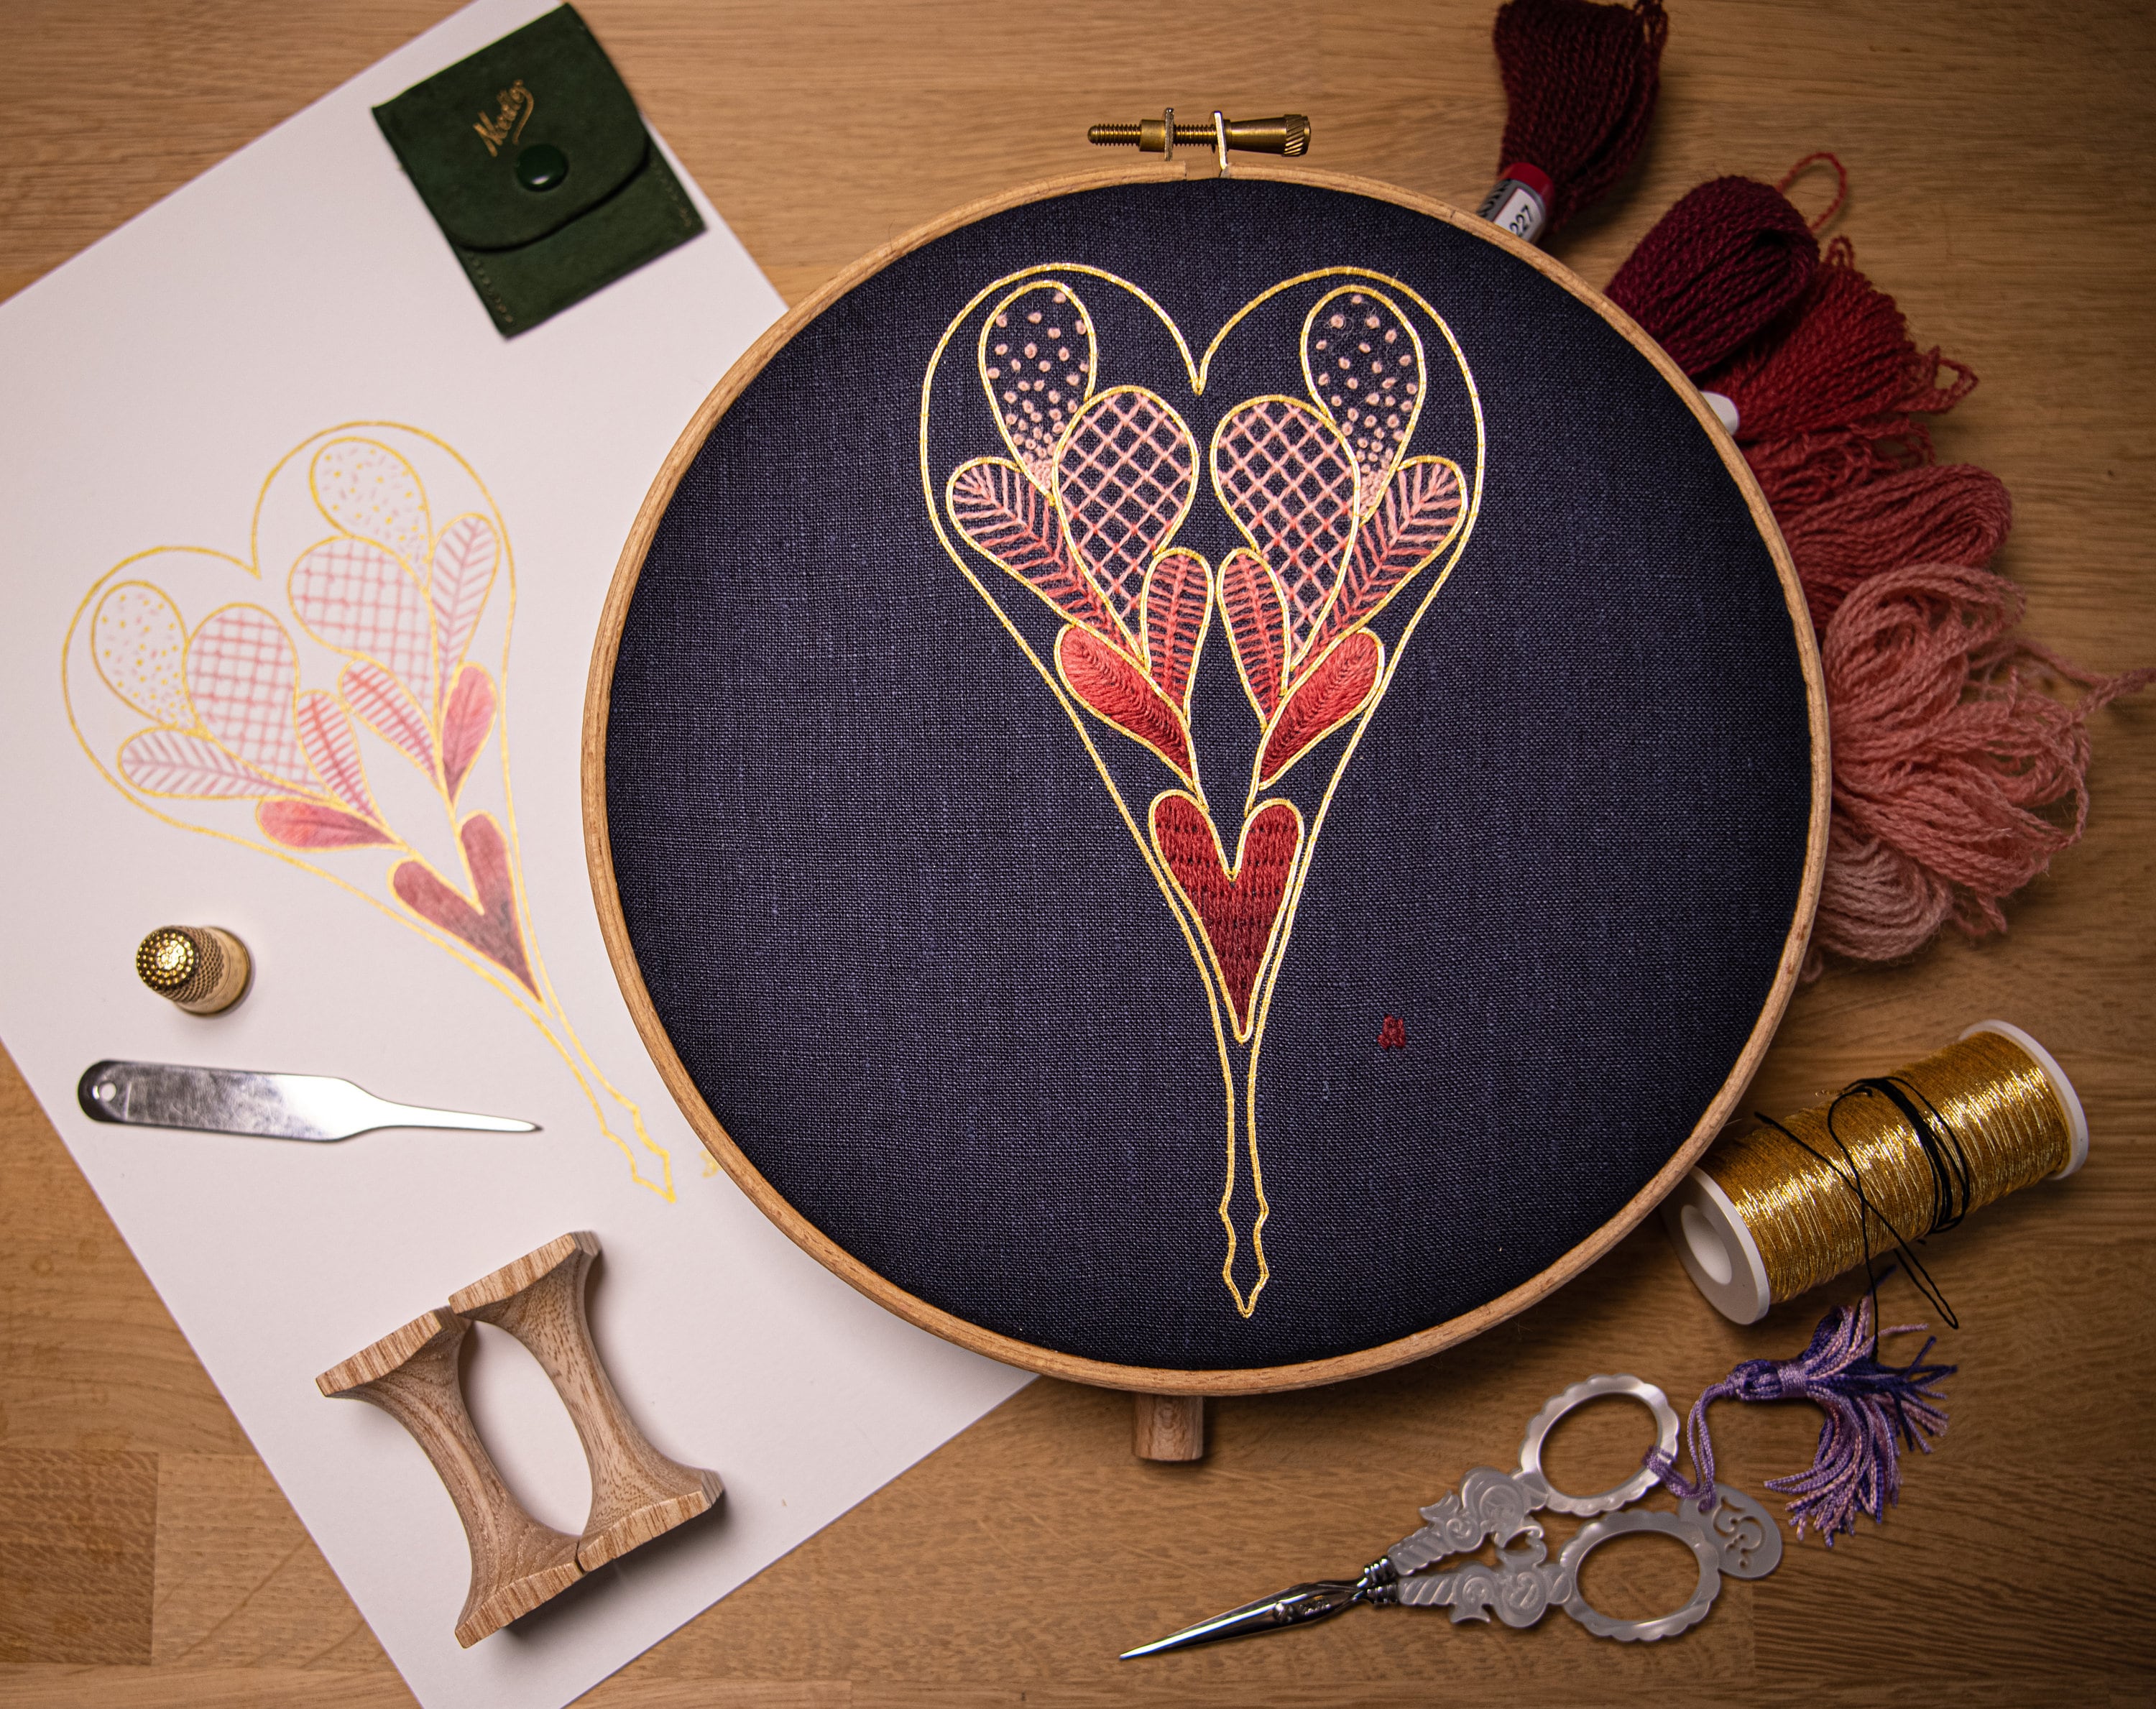 Tambour Embroidery Kit, Gold Work Kit, Luneville Embroidery Kit